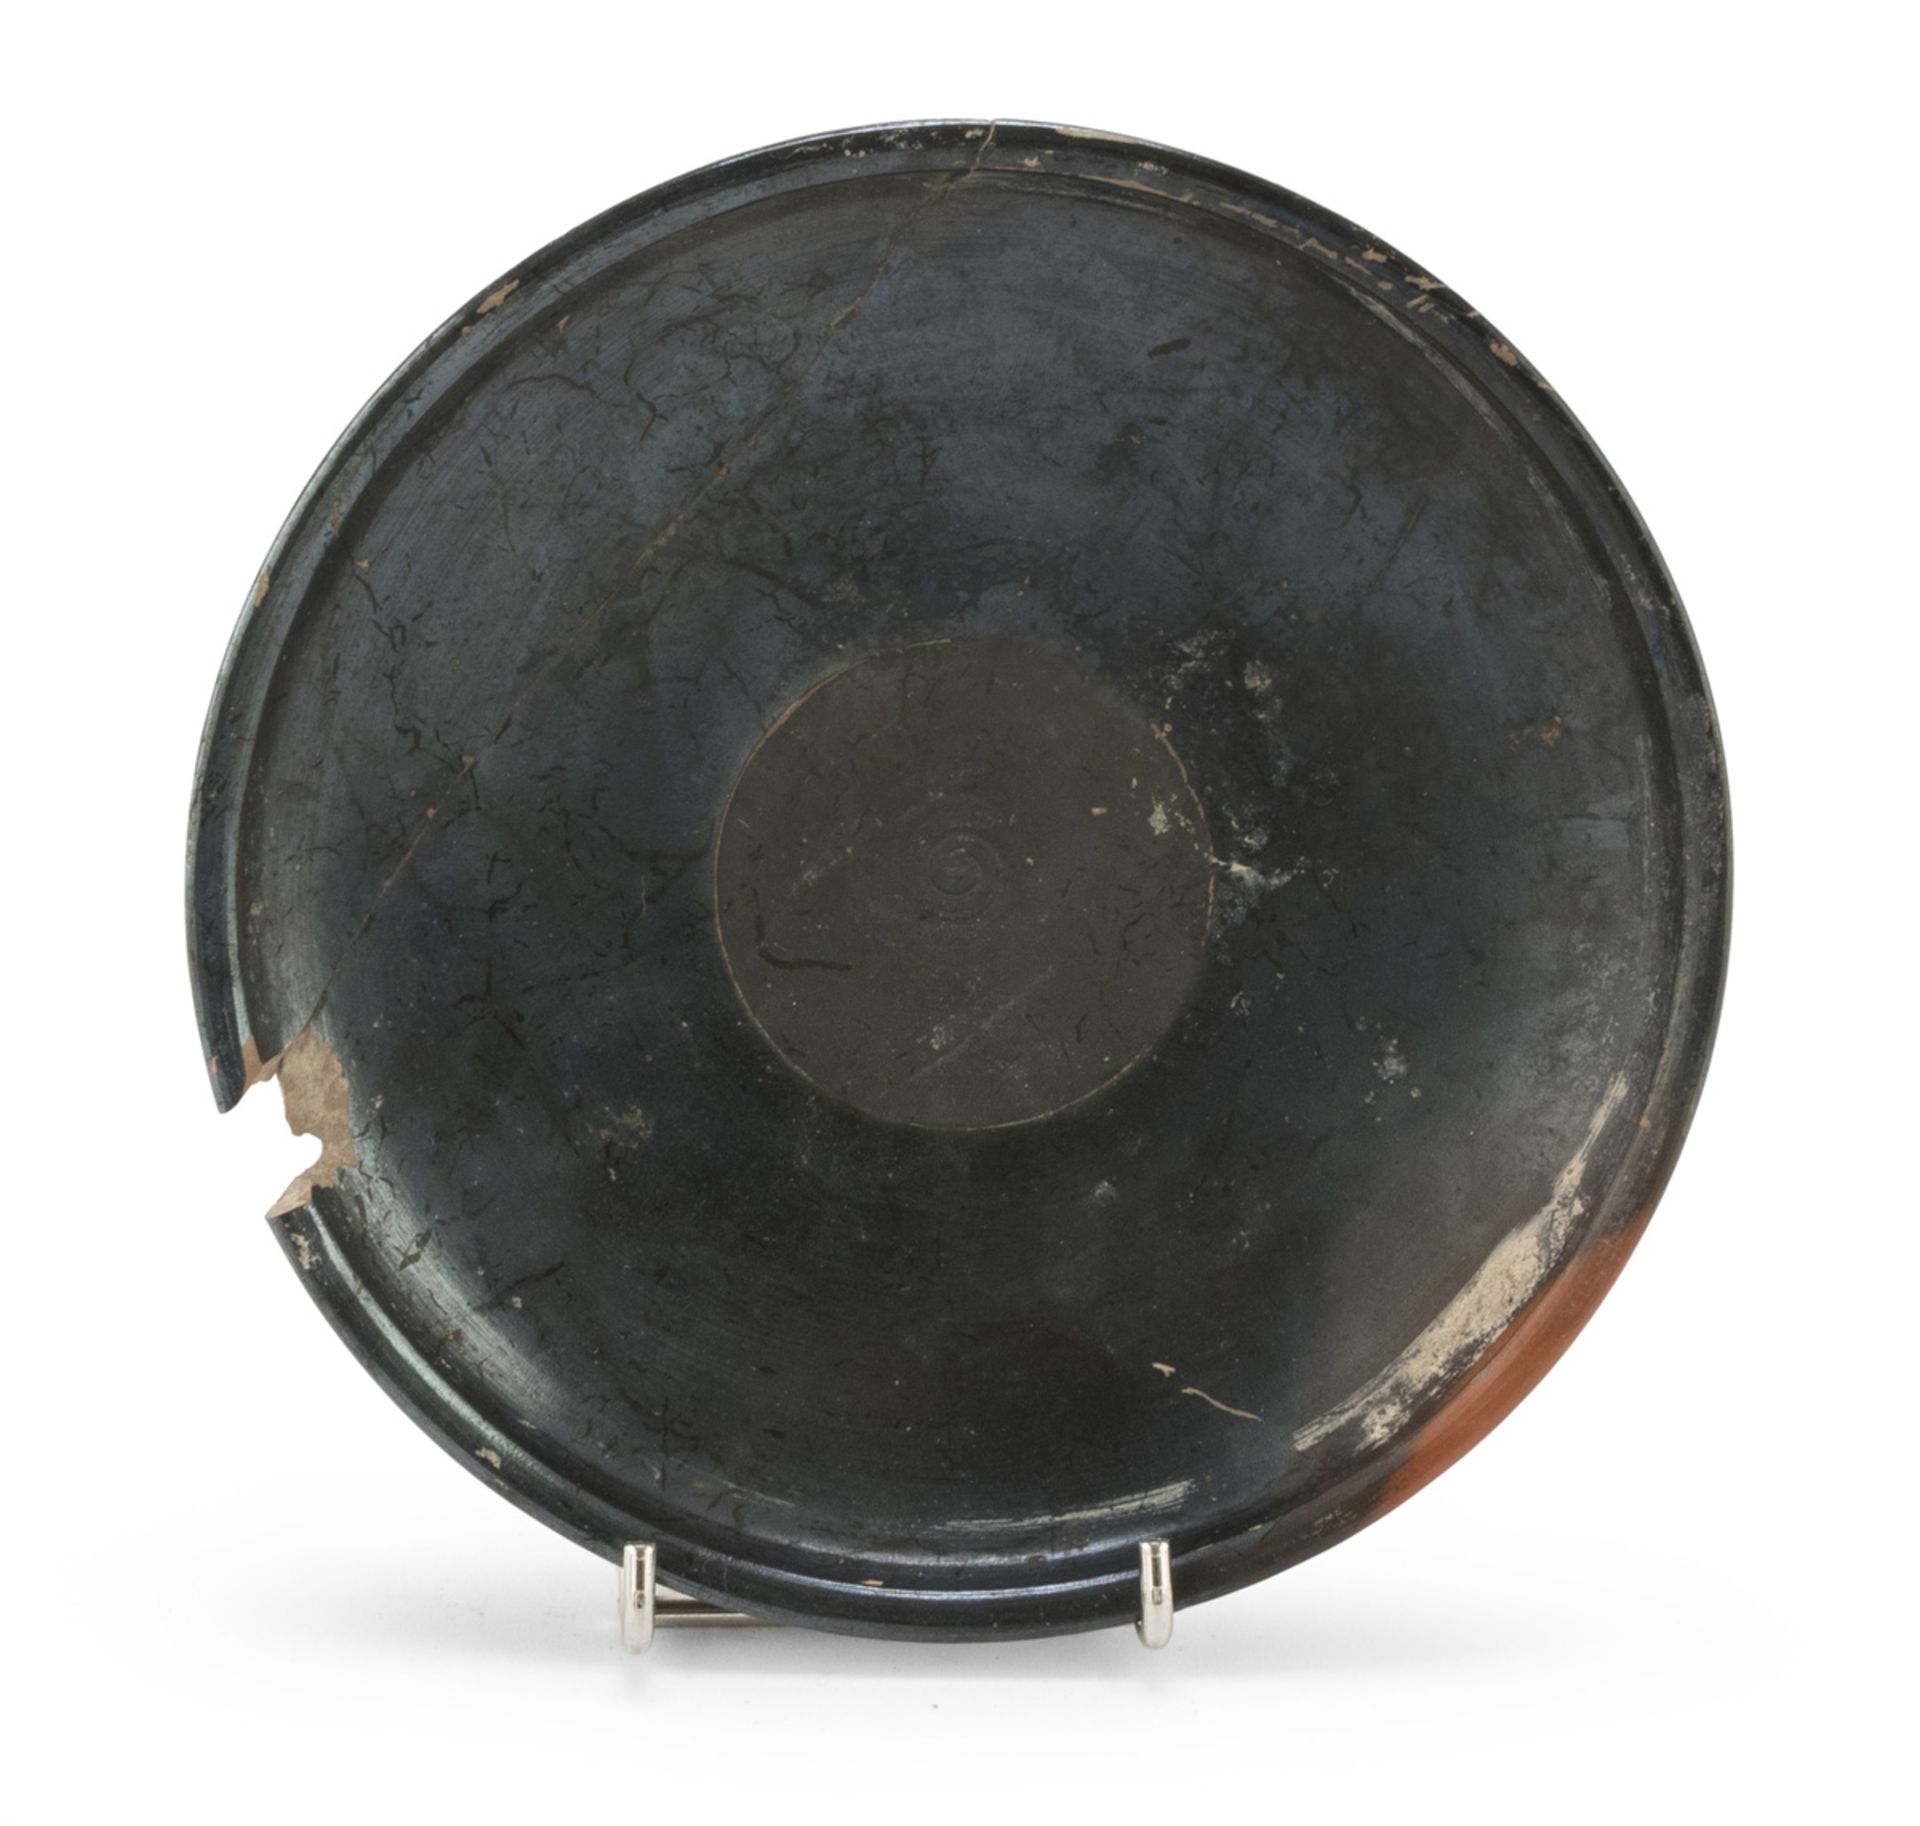 DISK IN ORANGE CLAY, 4TH CENTURY B.C. with shining black varnish, small lack on the edge. Measure